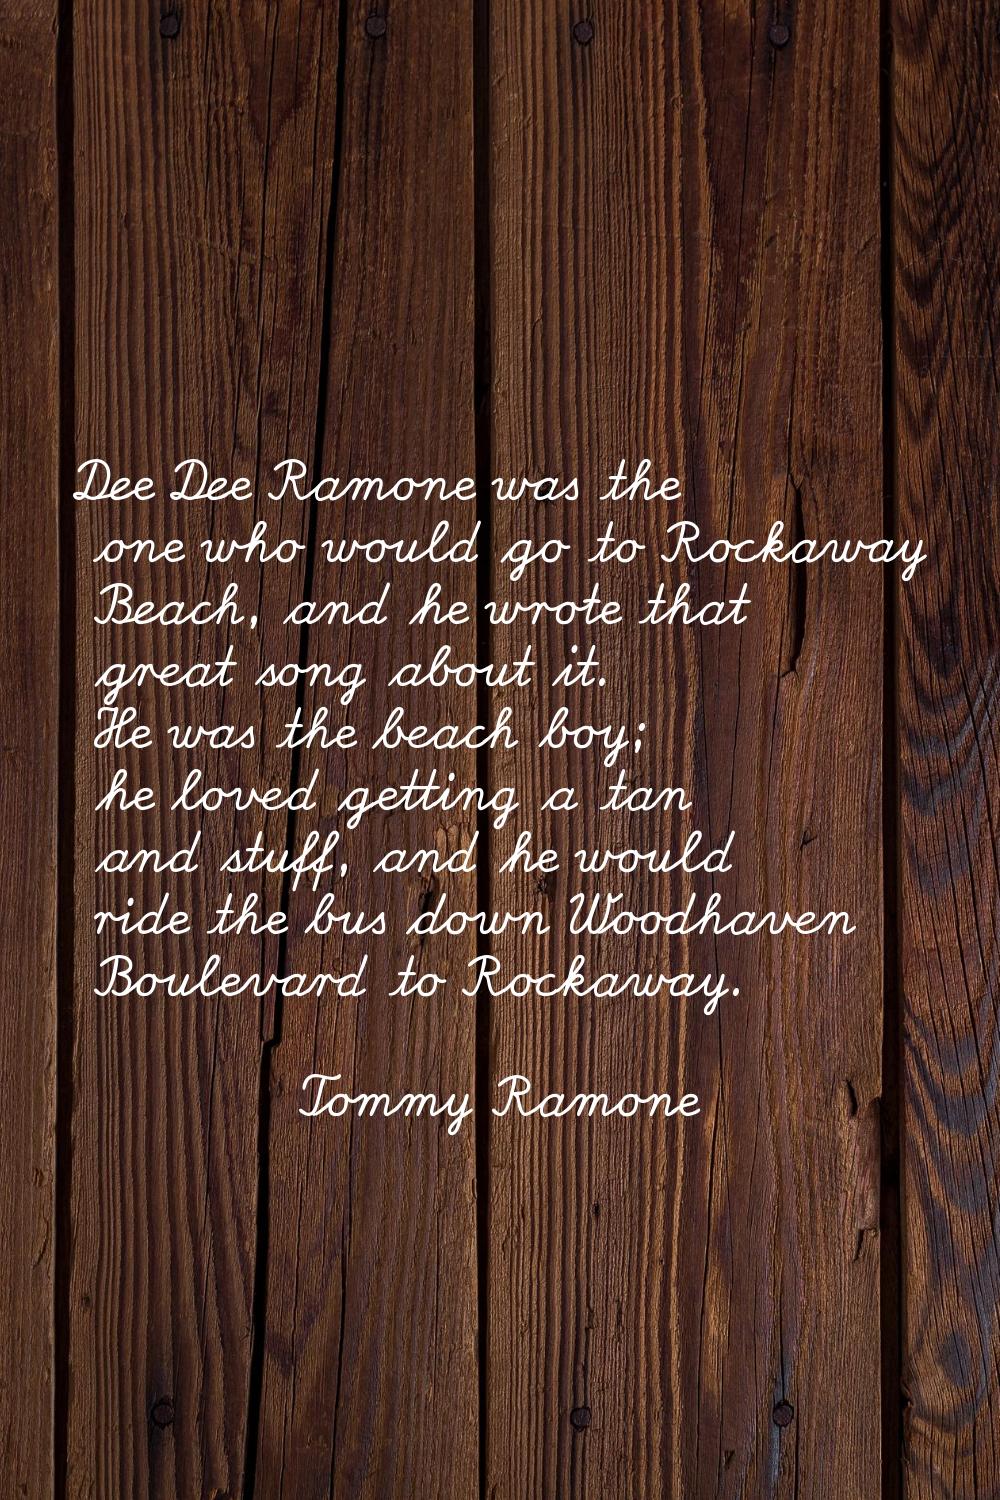 Dee Dee Ramone was the one who would go to Rockaway Beach, and he wrote that great song about it. H